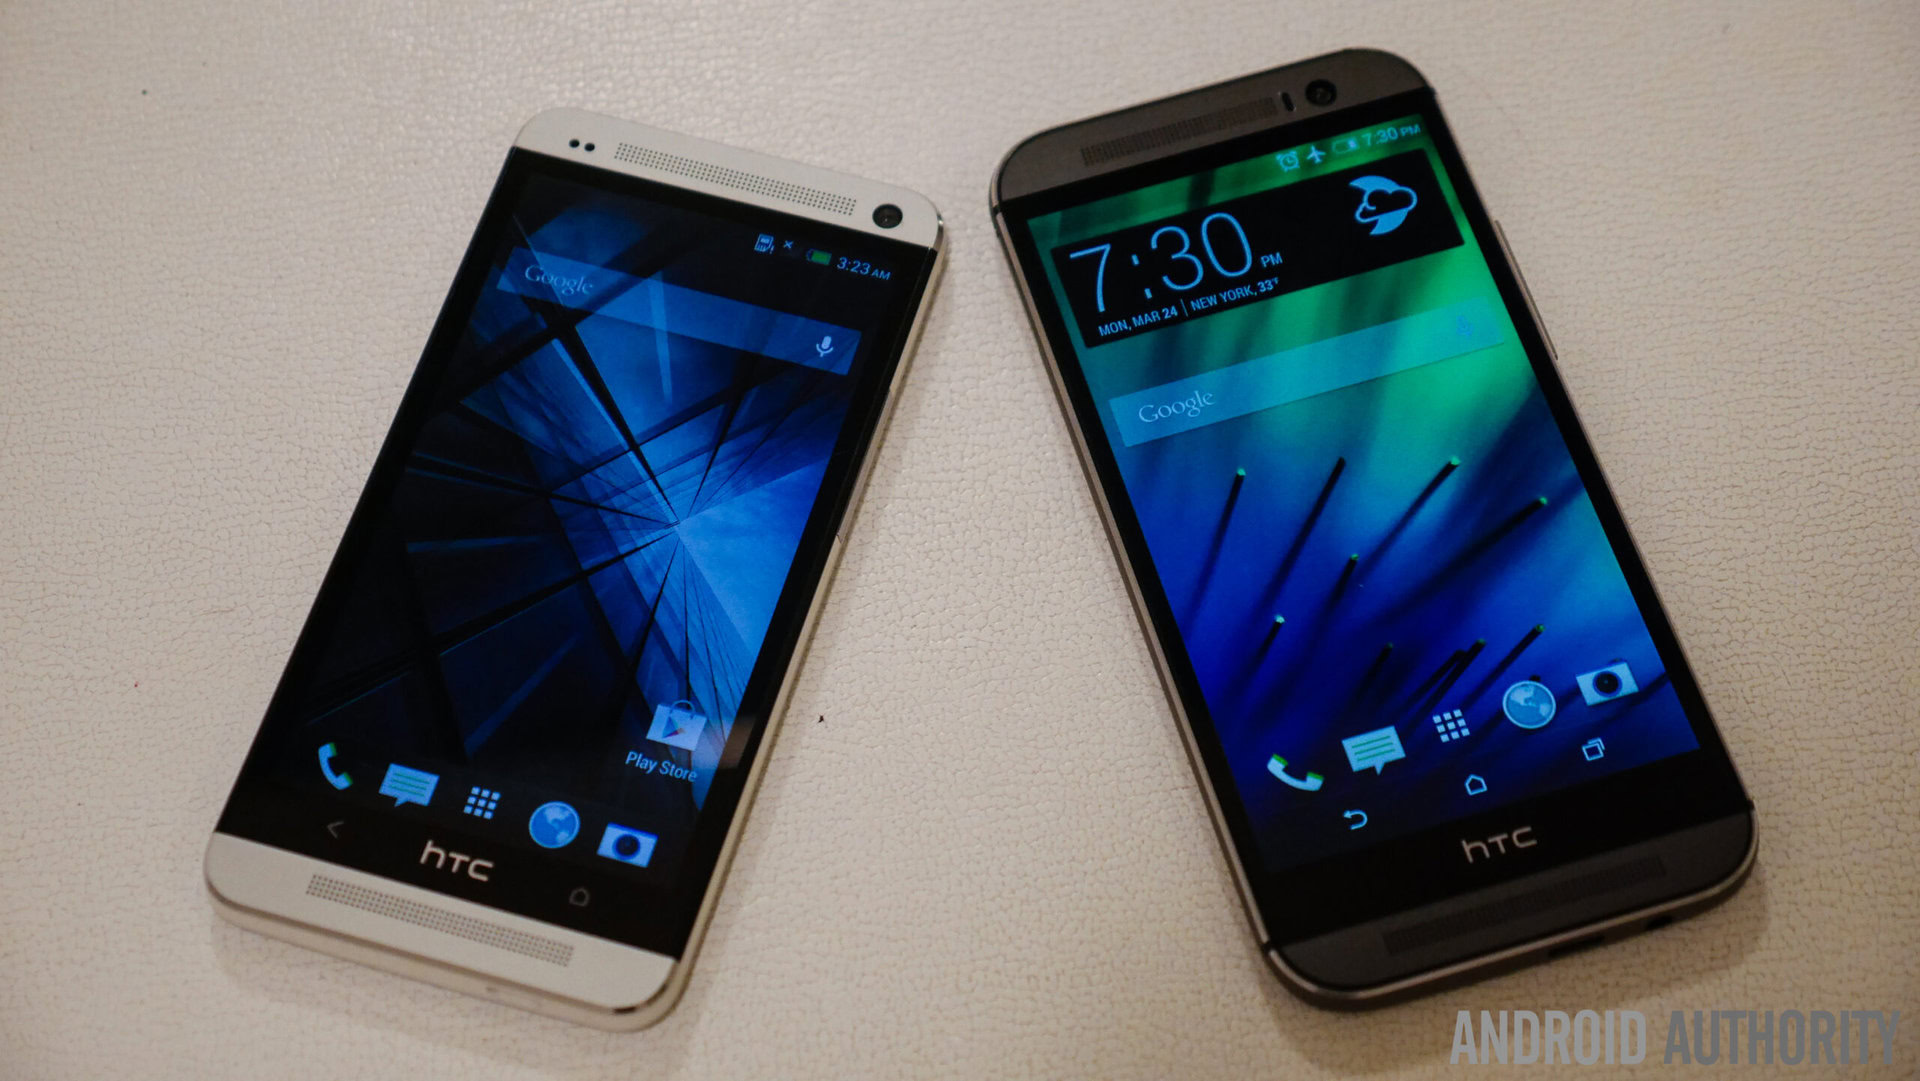 htc one m8 vs htc one m7 quick look aa (8 of 19)